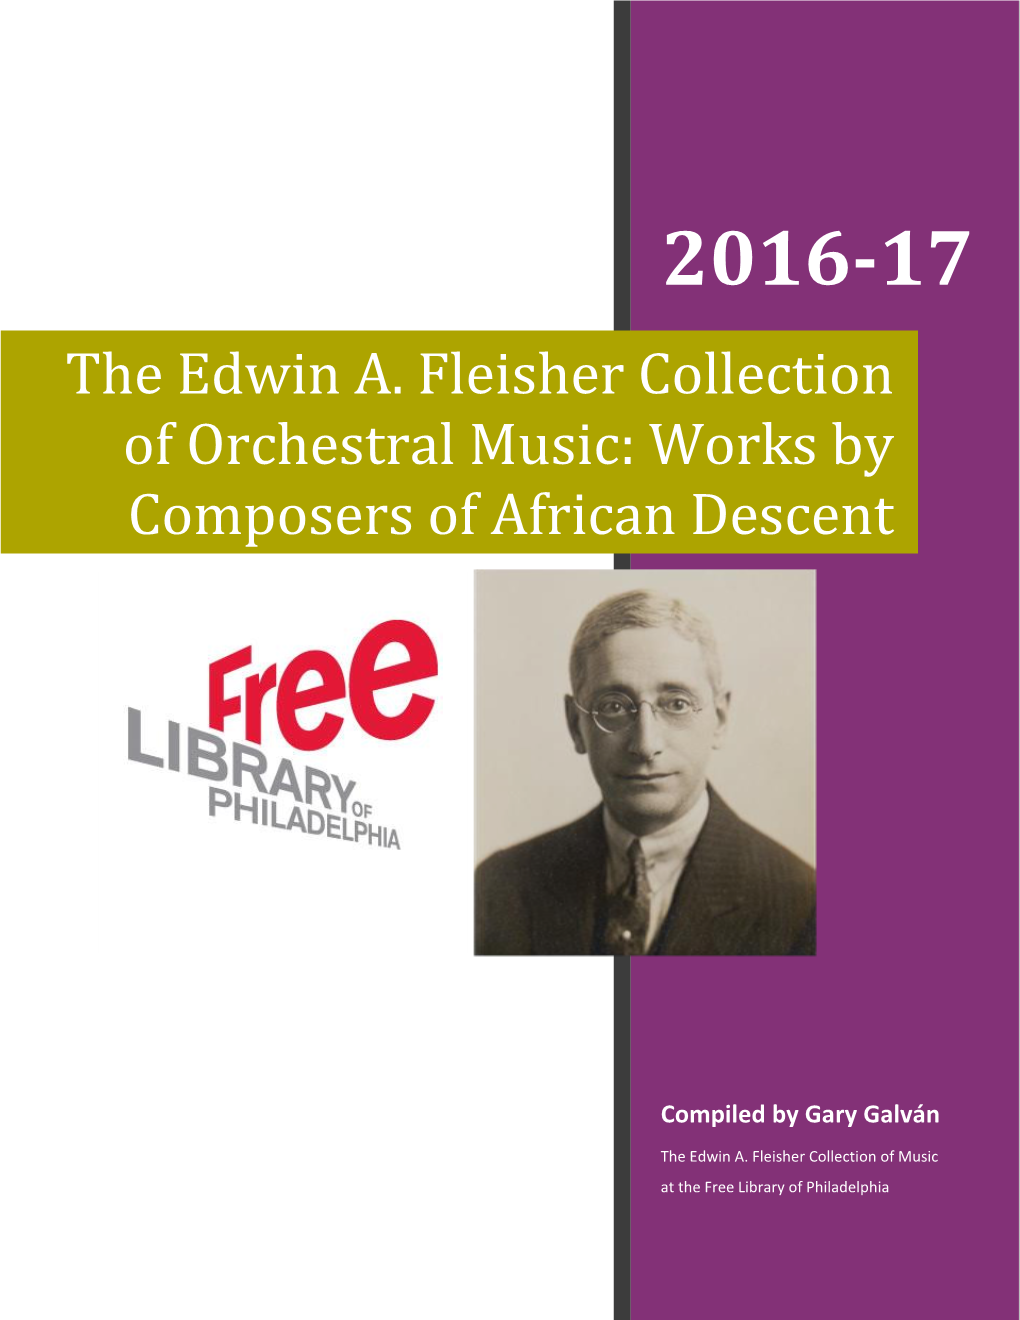 The Edwin A. Fleisher Collection of Orchestral Music: Works by Composers of African Descent